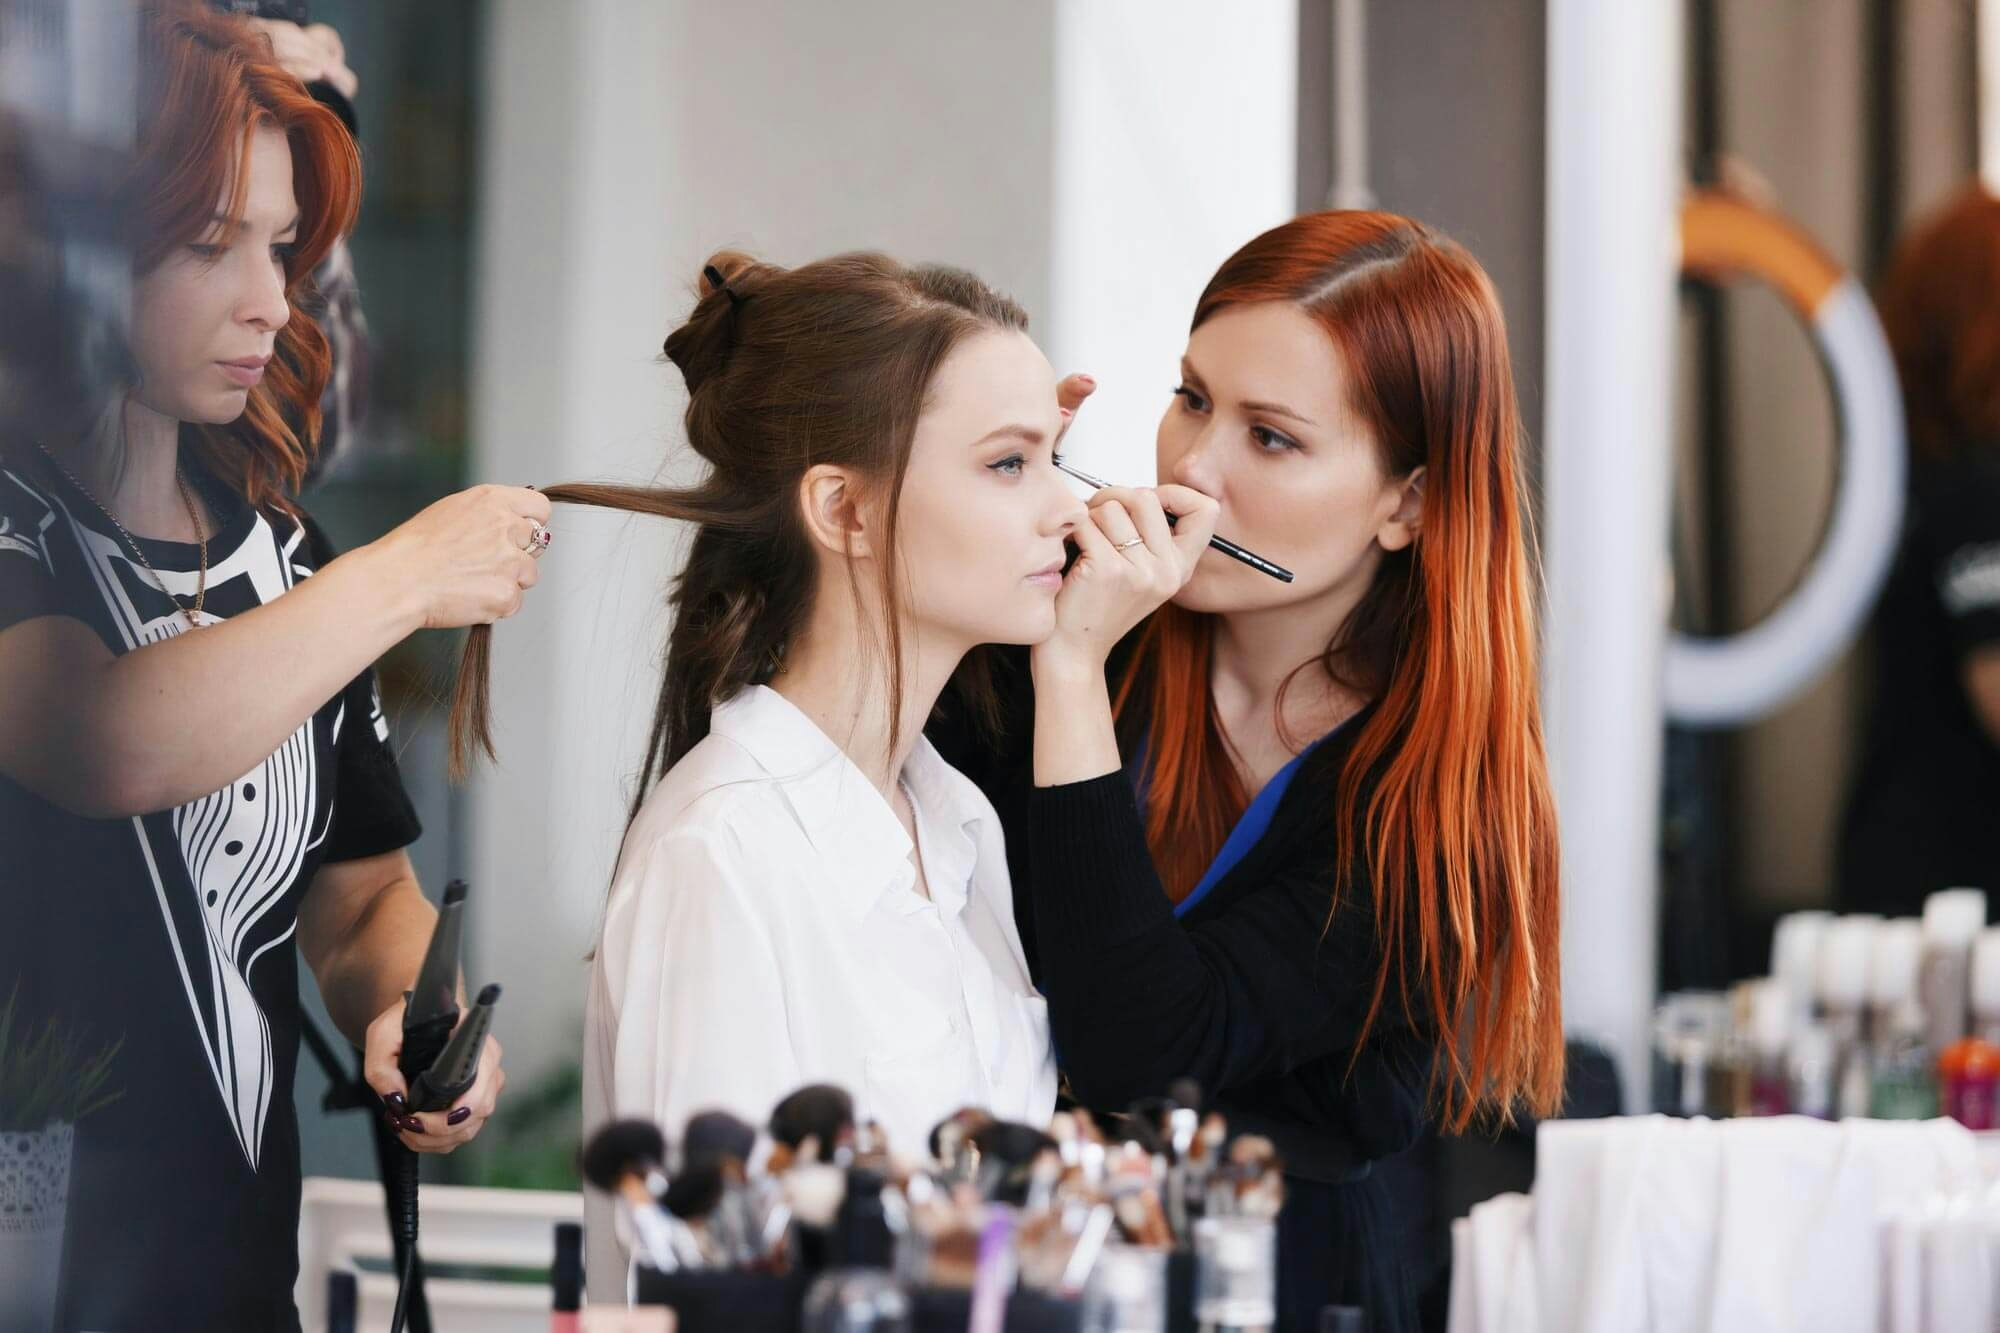 Two women applying makeup and styling a client's hair